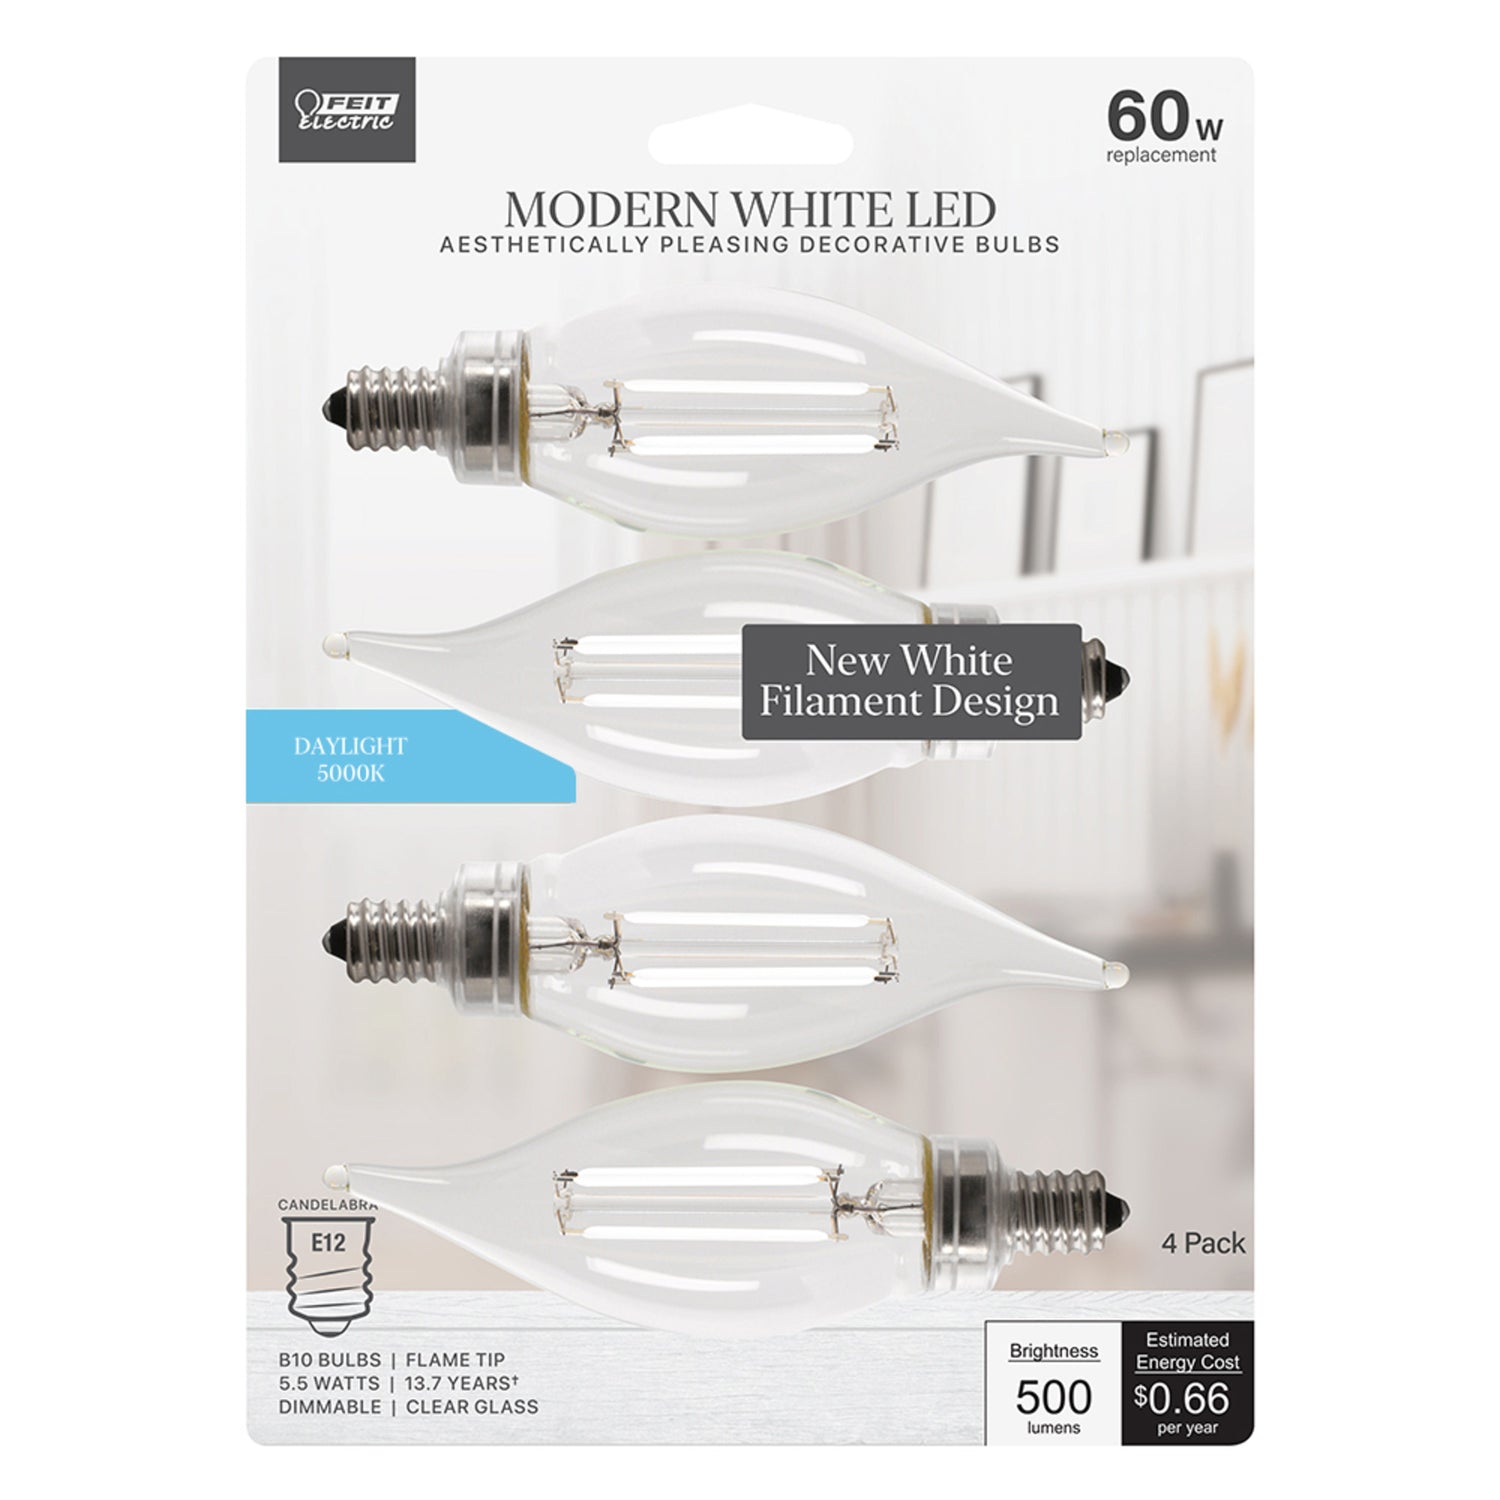 5.5W (60W Replacement) Daylight (5000K) B10 Candelabra (E12 Base) Dimmable Flame Tip Exposed White Filament Chandelier LED Bulb (4-Pack)